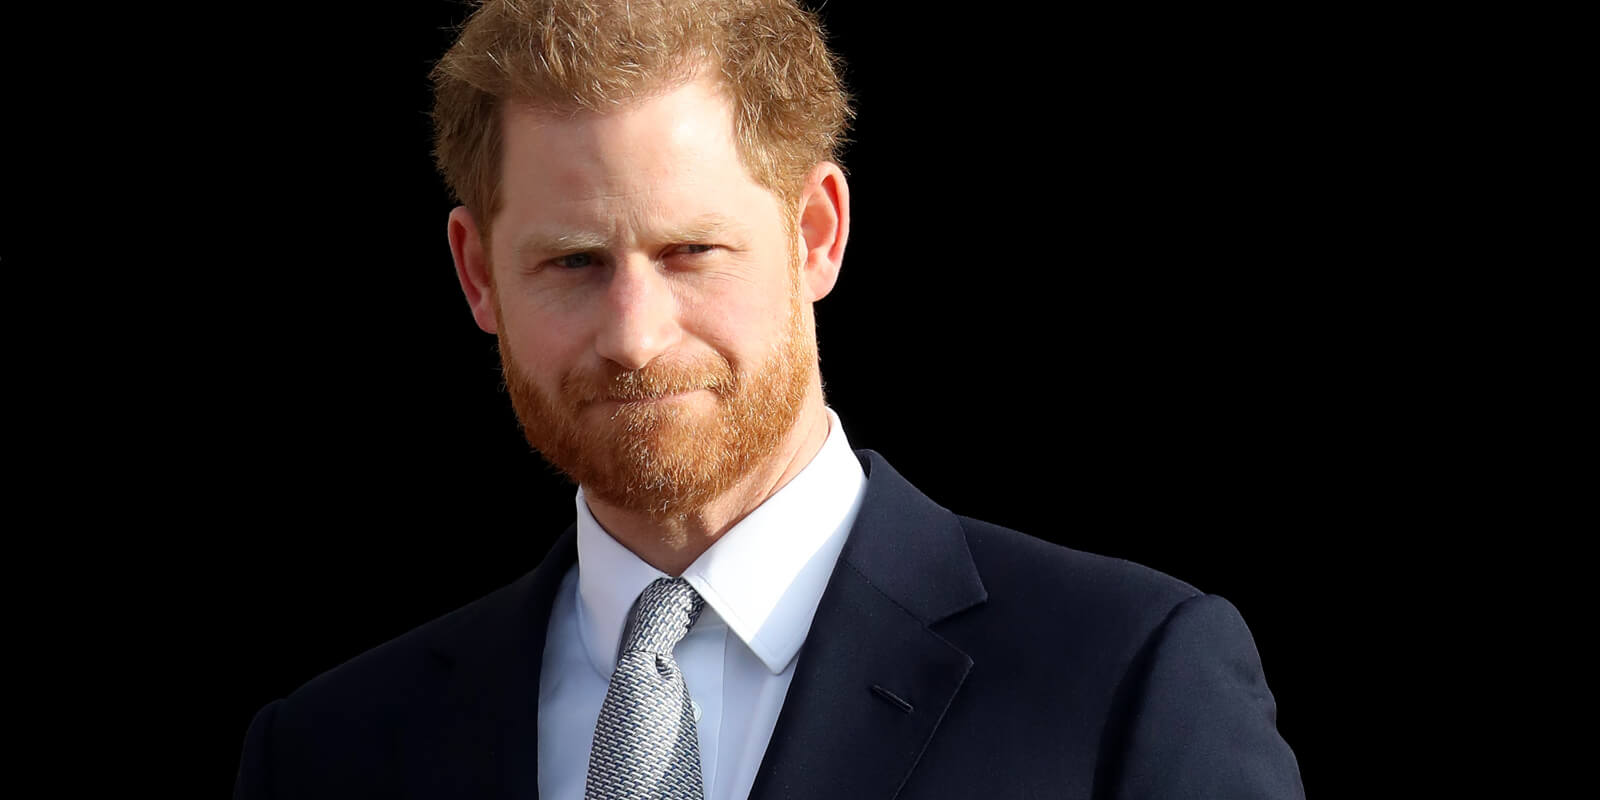 Prince Harry hosts the Rugby League World Cup 2021 draws for the men's, women's and wheelchair tournaments at Buckingham Palace on January 16, 2020.